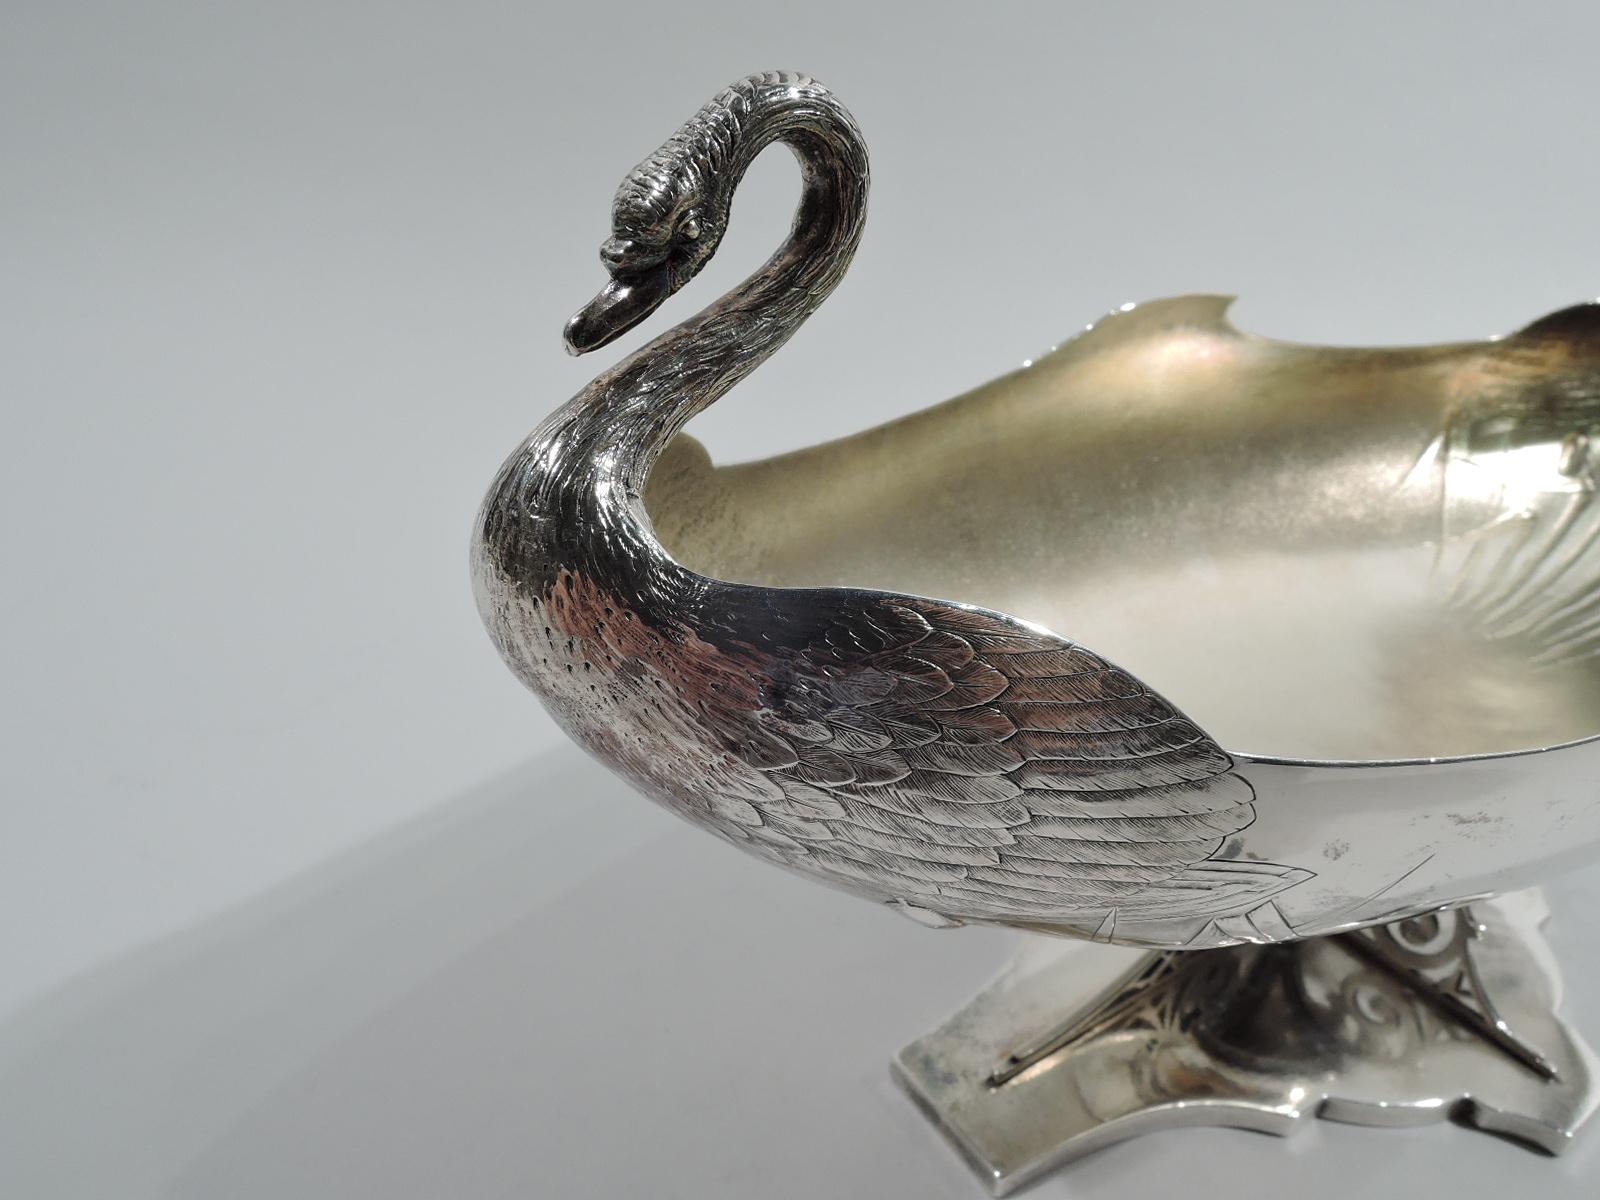 Turn-of-the-century sterling silver bowl. Made by Whiting in New York. Narrow and oval with swan-form ends: head and neck flowing into splayed and engraved wings. Underside has chased Japonesque cattails with turned-down and overlapping tendrils.